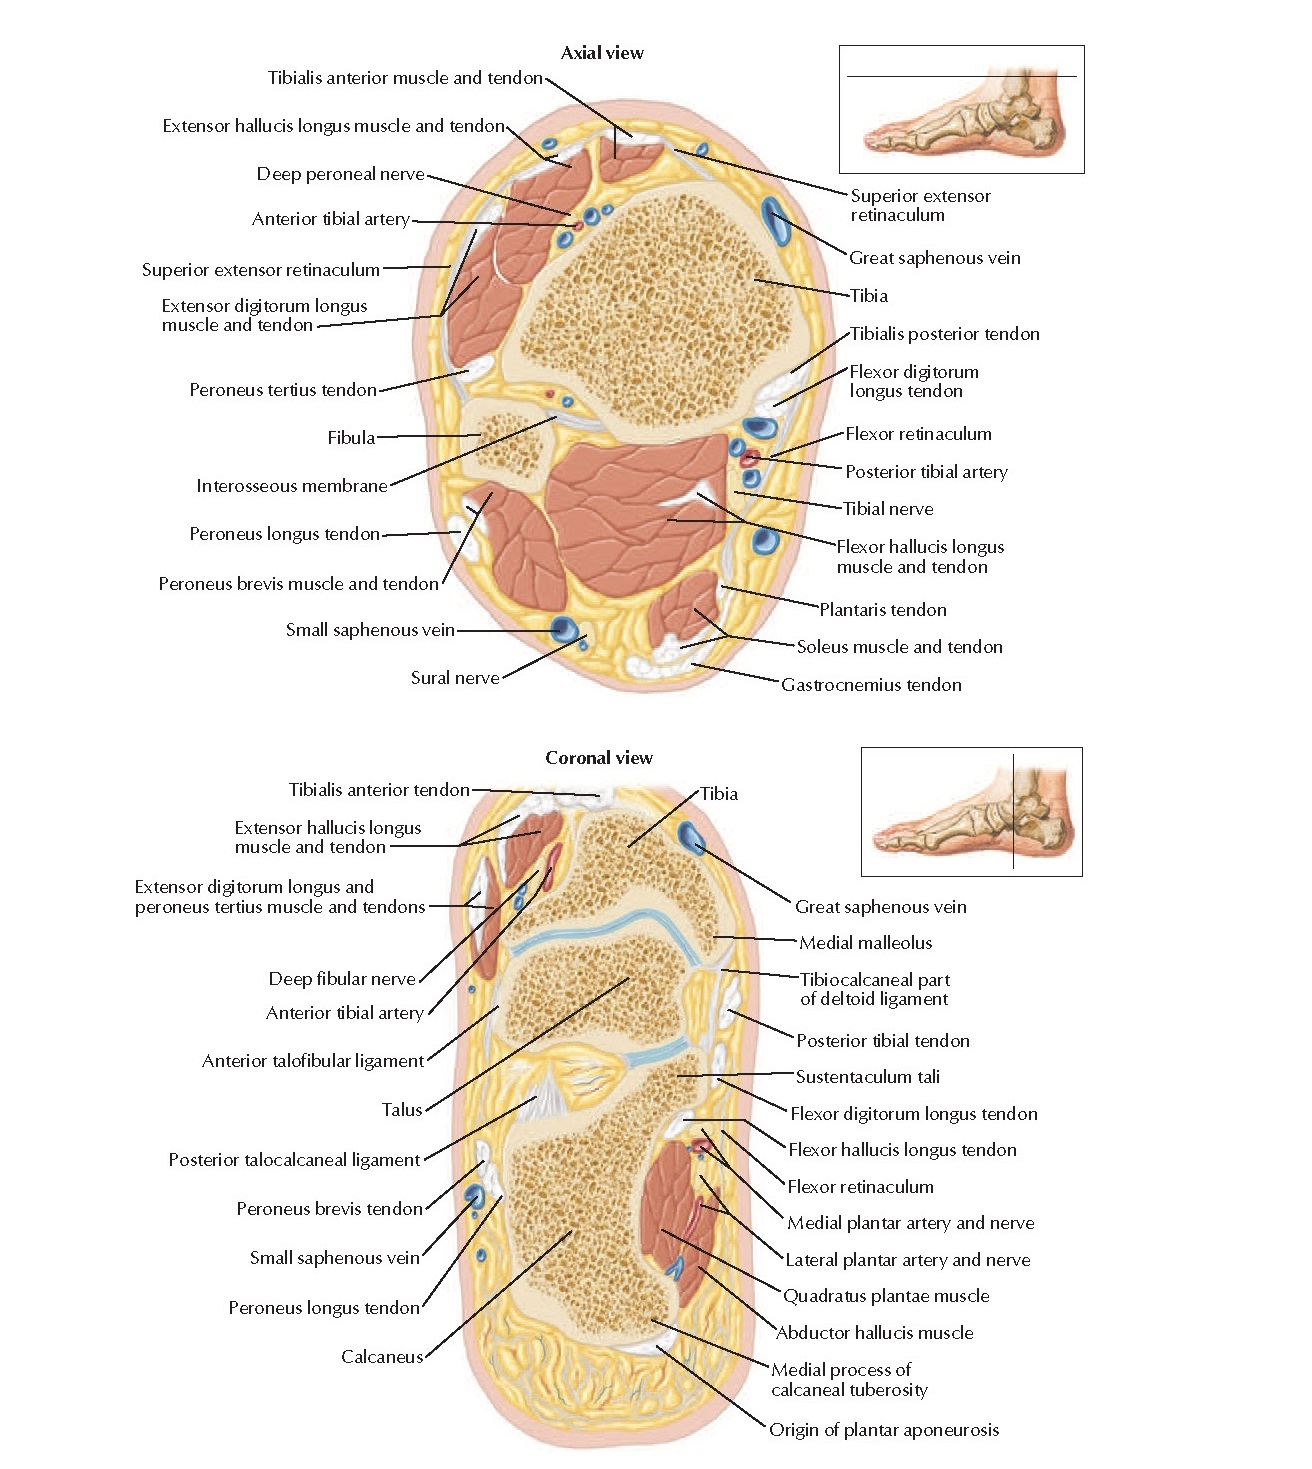 Cross-Sectional Anatomy of Ankle and Foot Anatomy